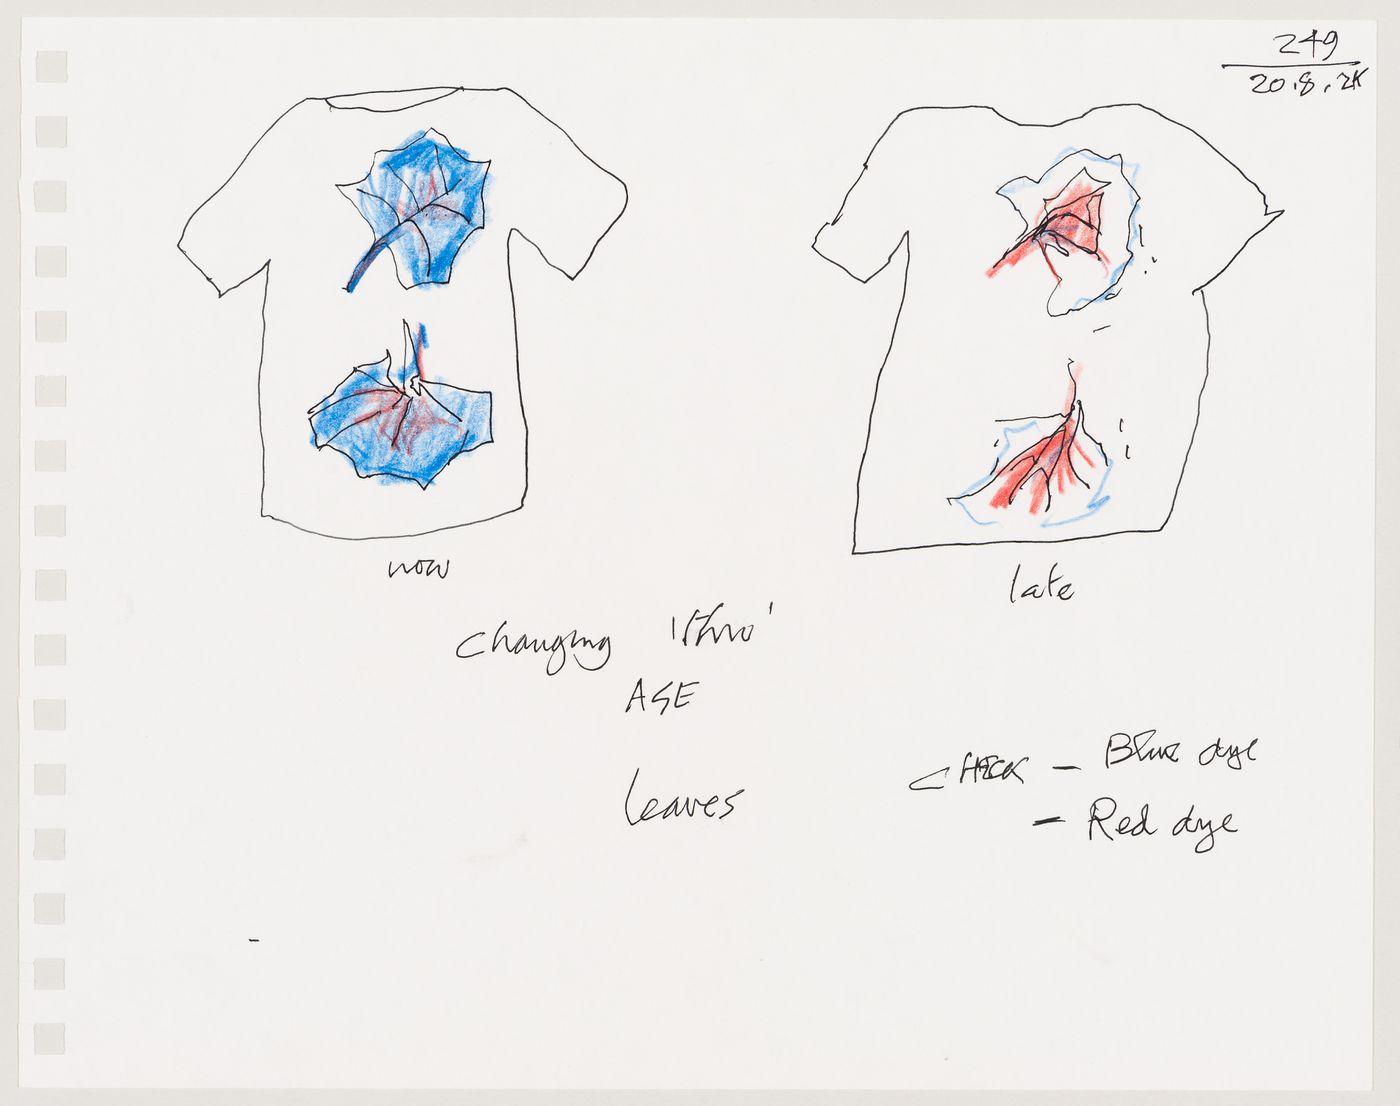 T-shirt design sketches ("Changing 'thro' age")